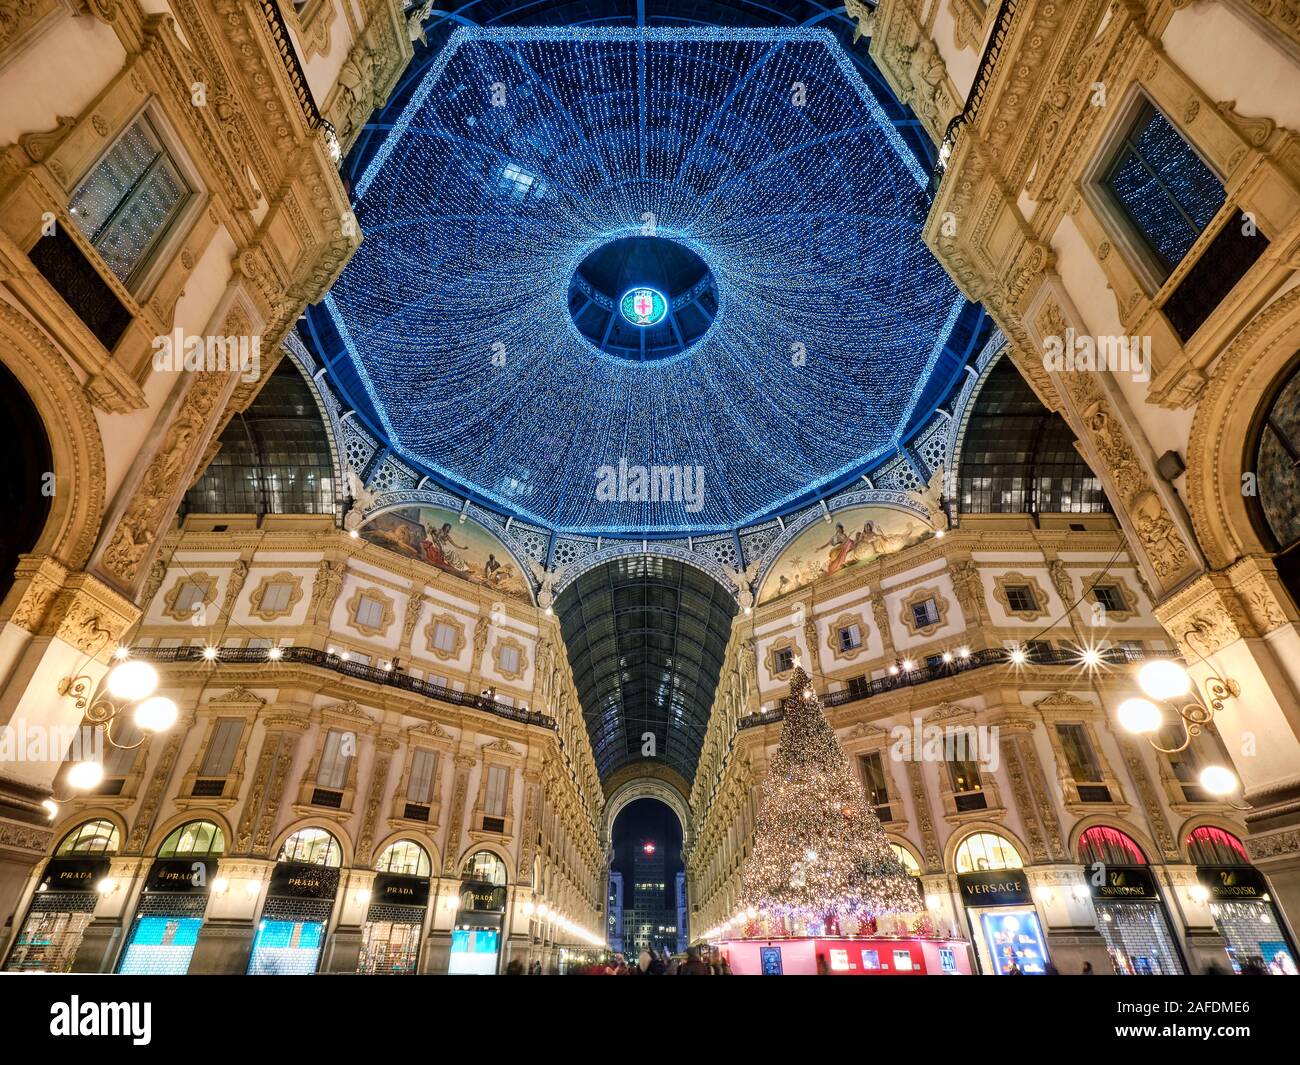 Milan, Italy - December 10 2019: The dome of Galleria Vittorio Emanuele II shopping mall illuminated for Christmas, Italy Stock Photo